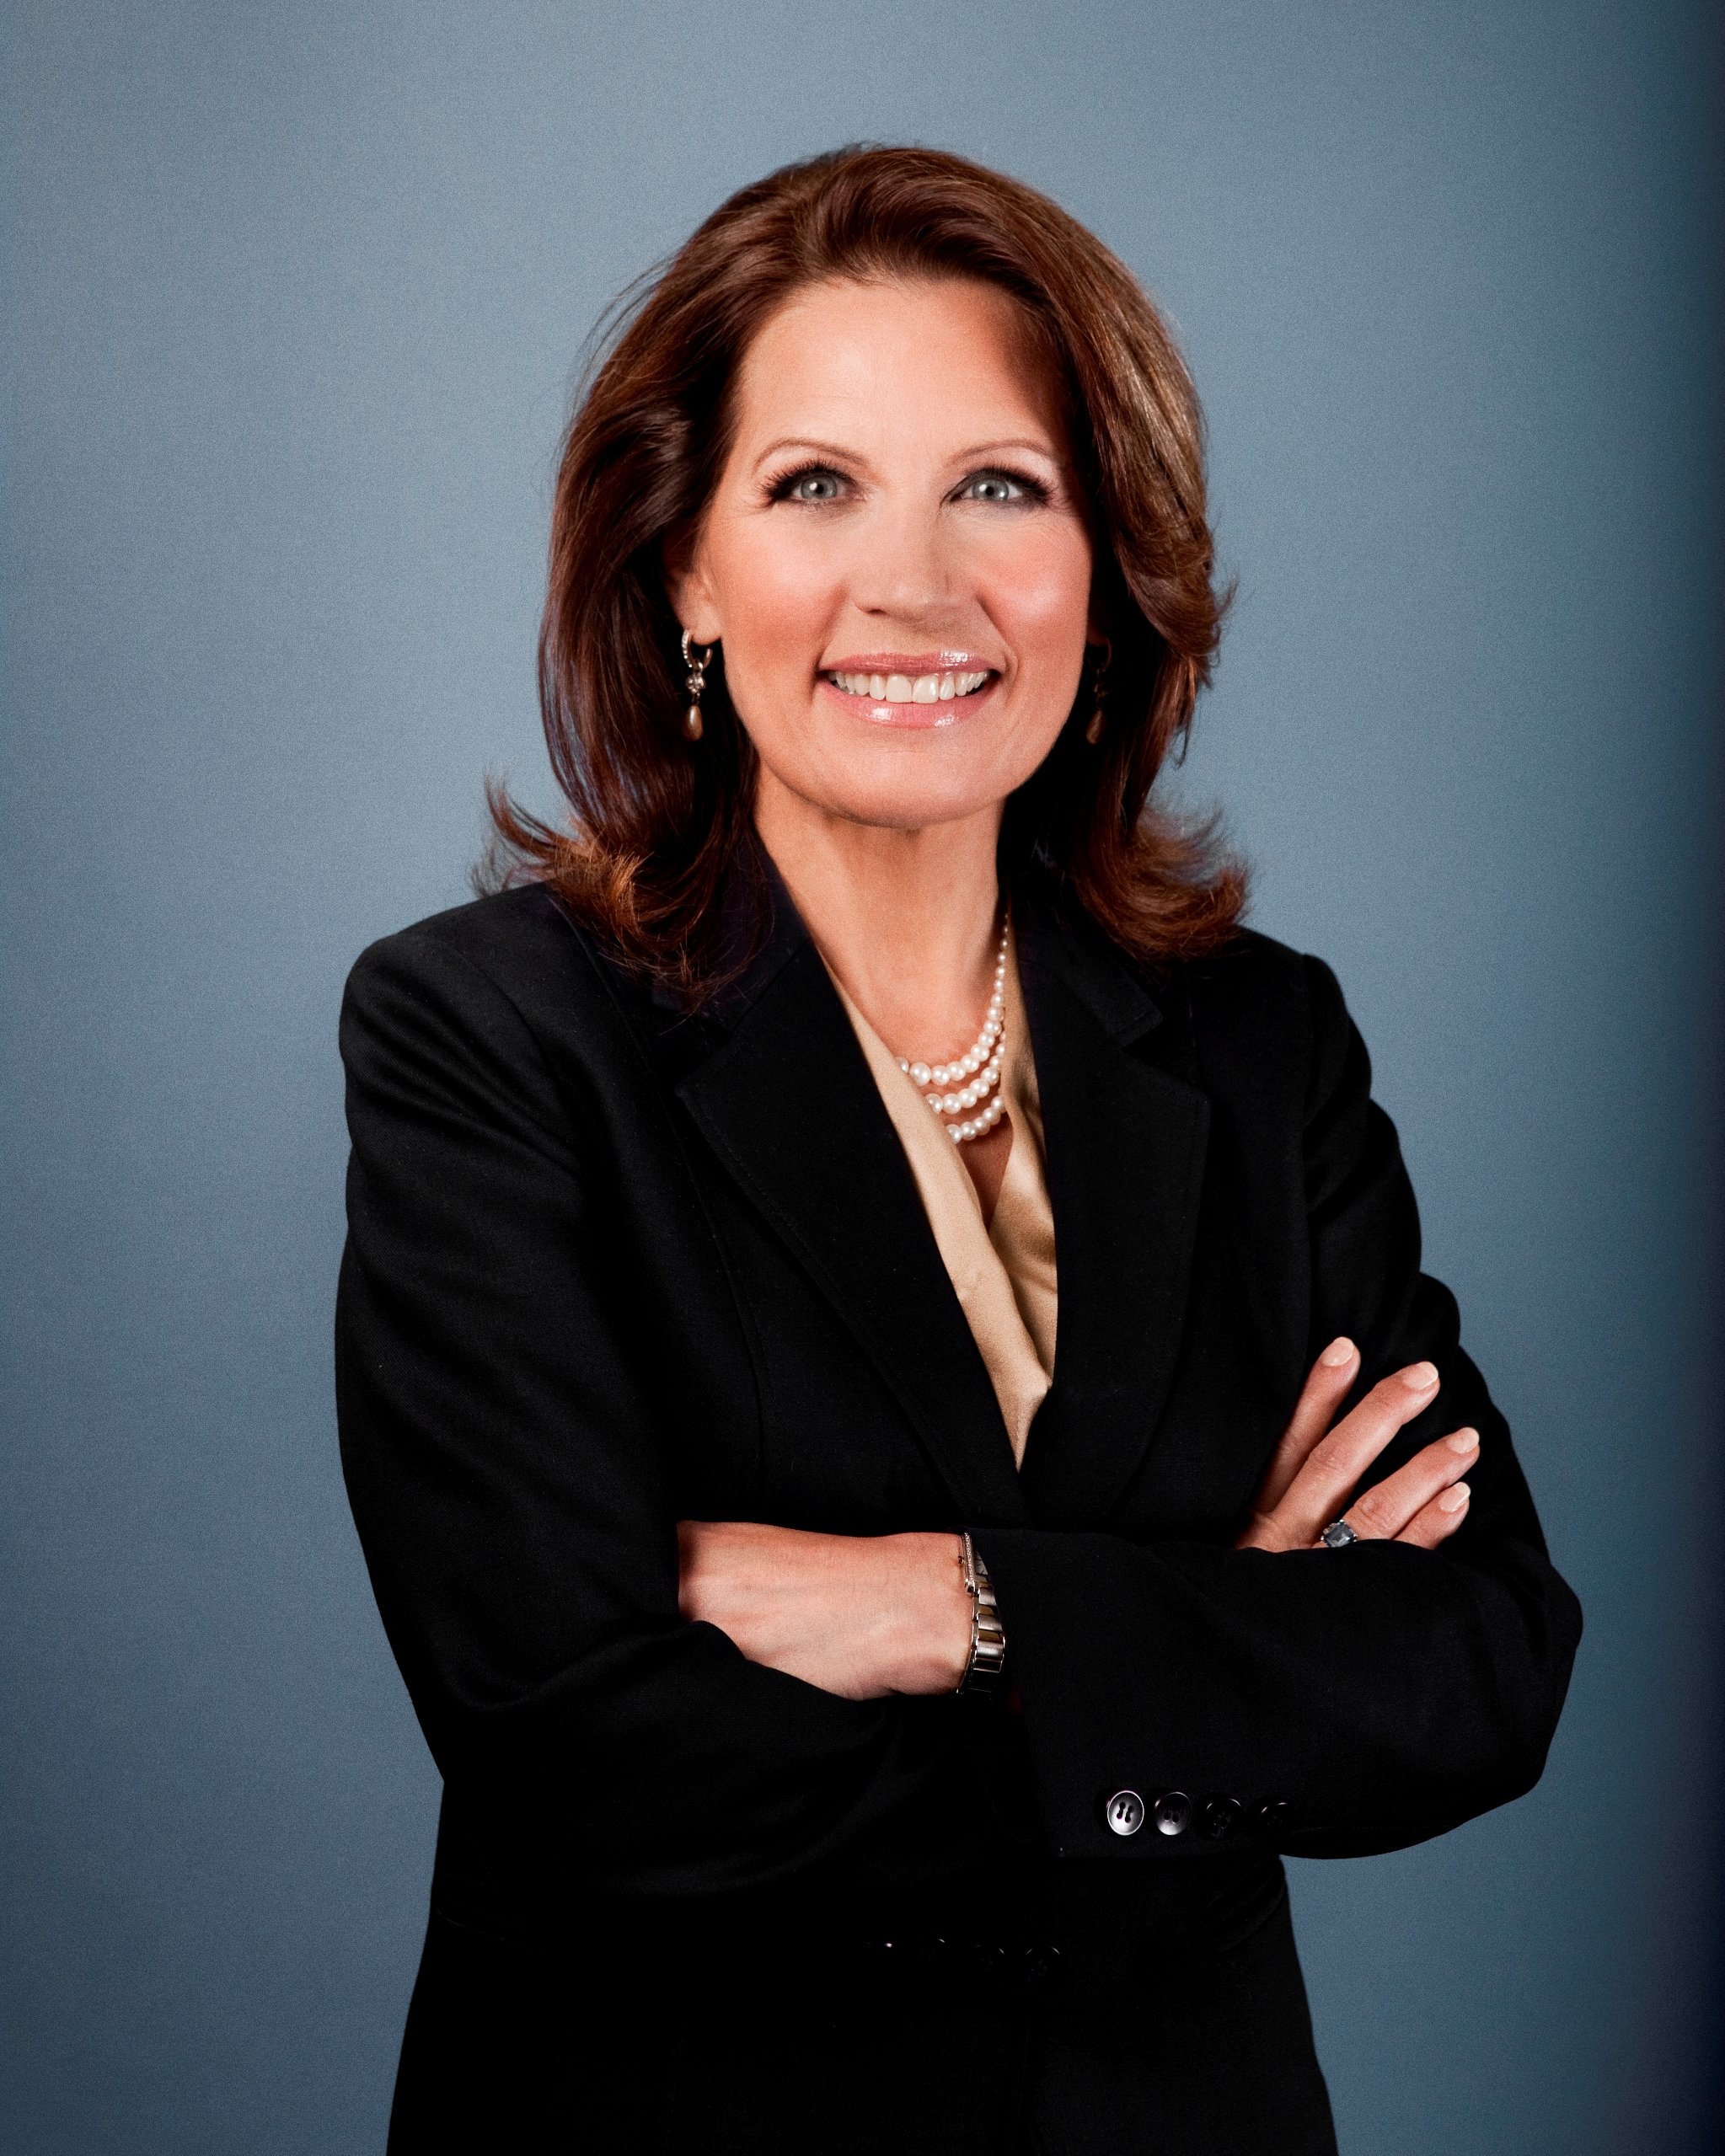 Official portrait of Congresswoman Michele Bachmann from her Web site, http://bachmann.house.gov/.